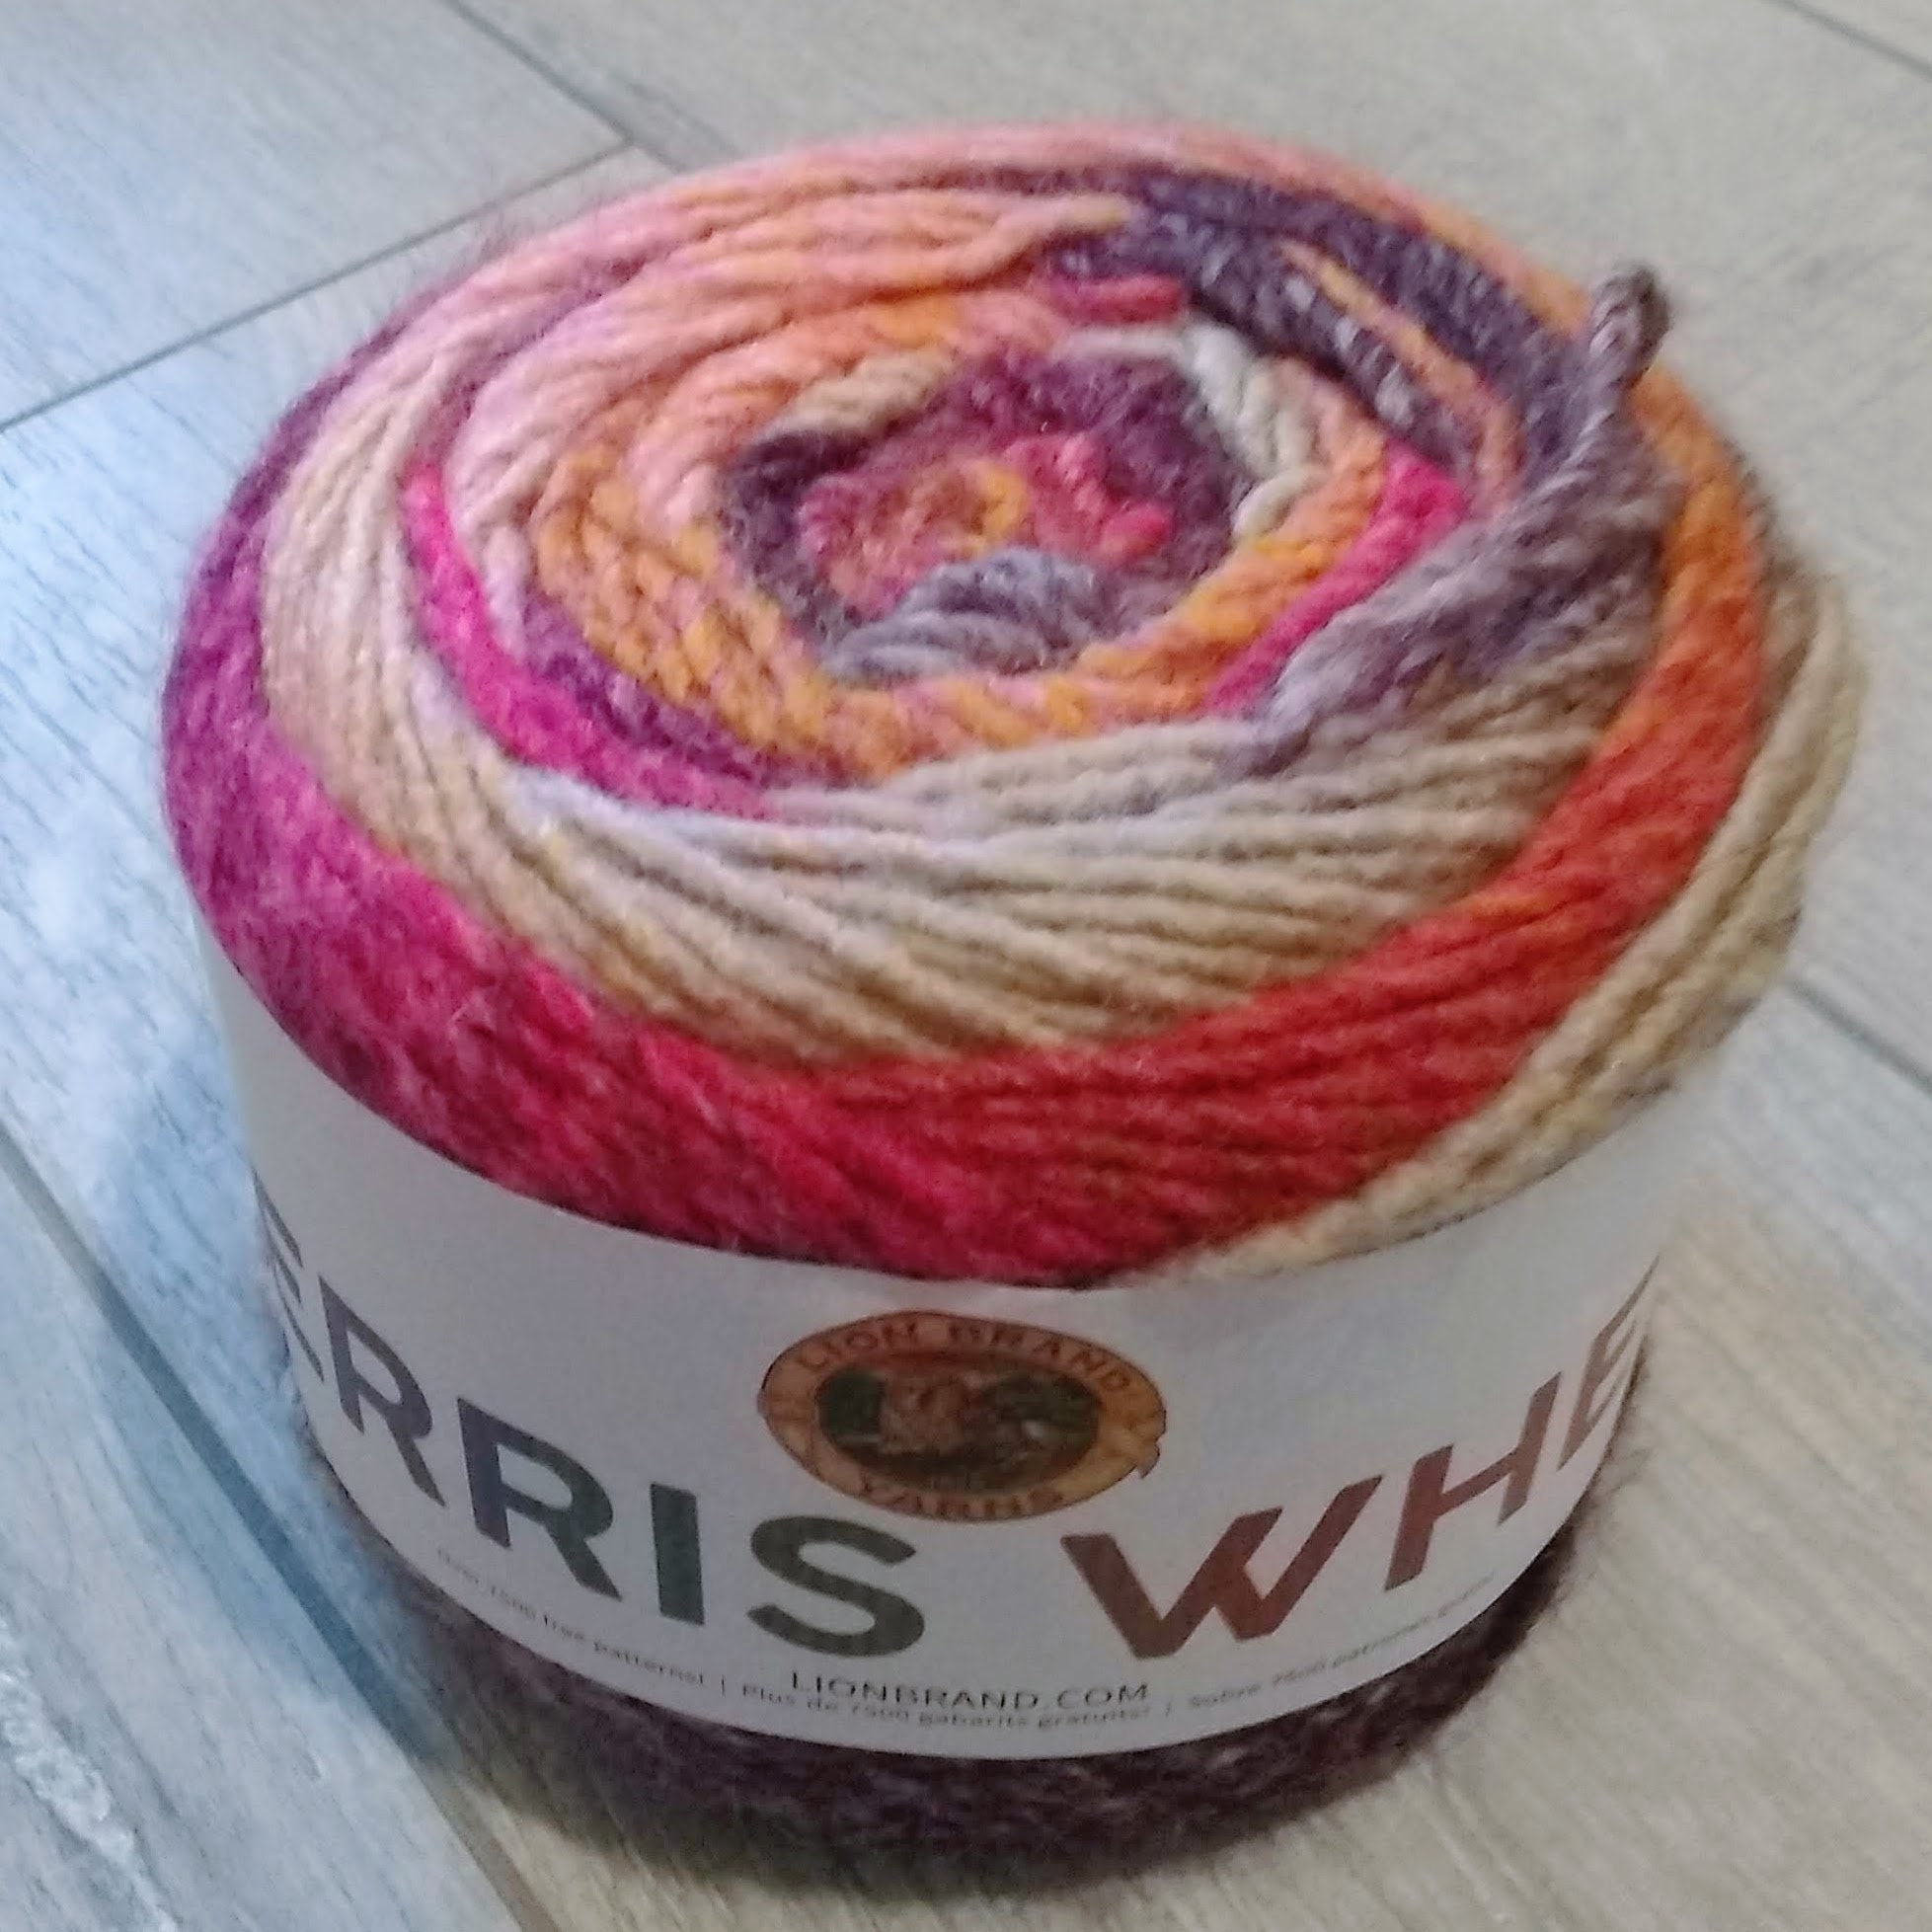 Lion Brand Yarn Ferris Wheel Yarn, Multicolor Yarn for Knitting,  Crocheting, and Crafts, 1-Pack, Cherry on Top